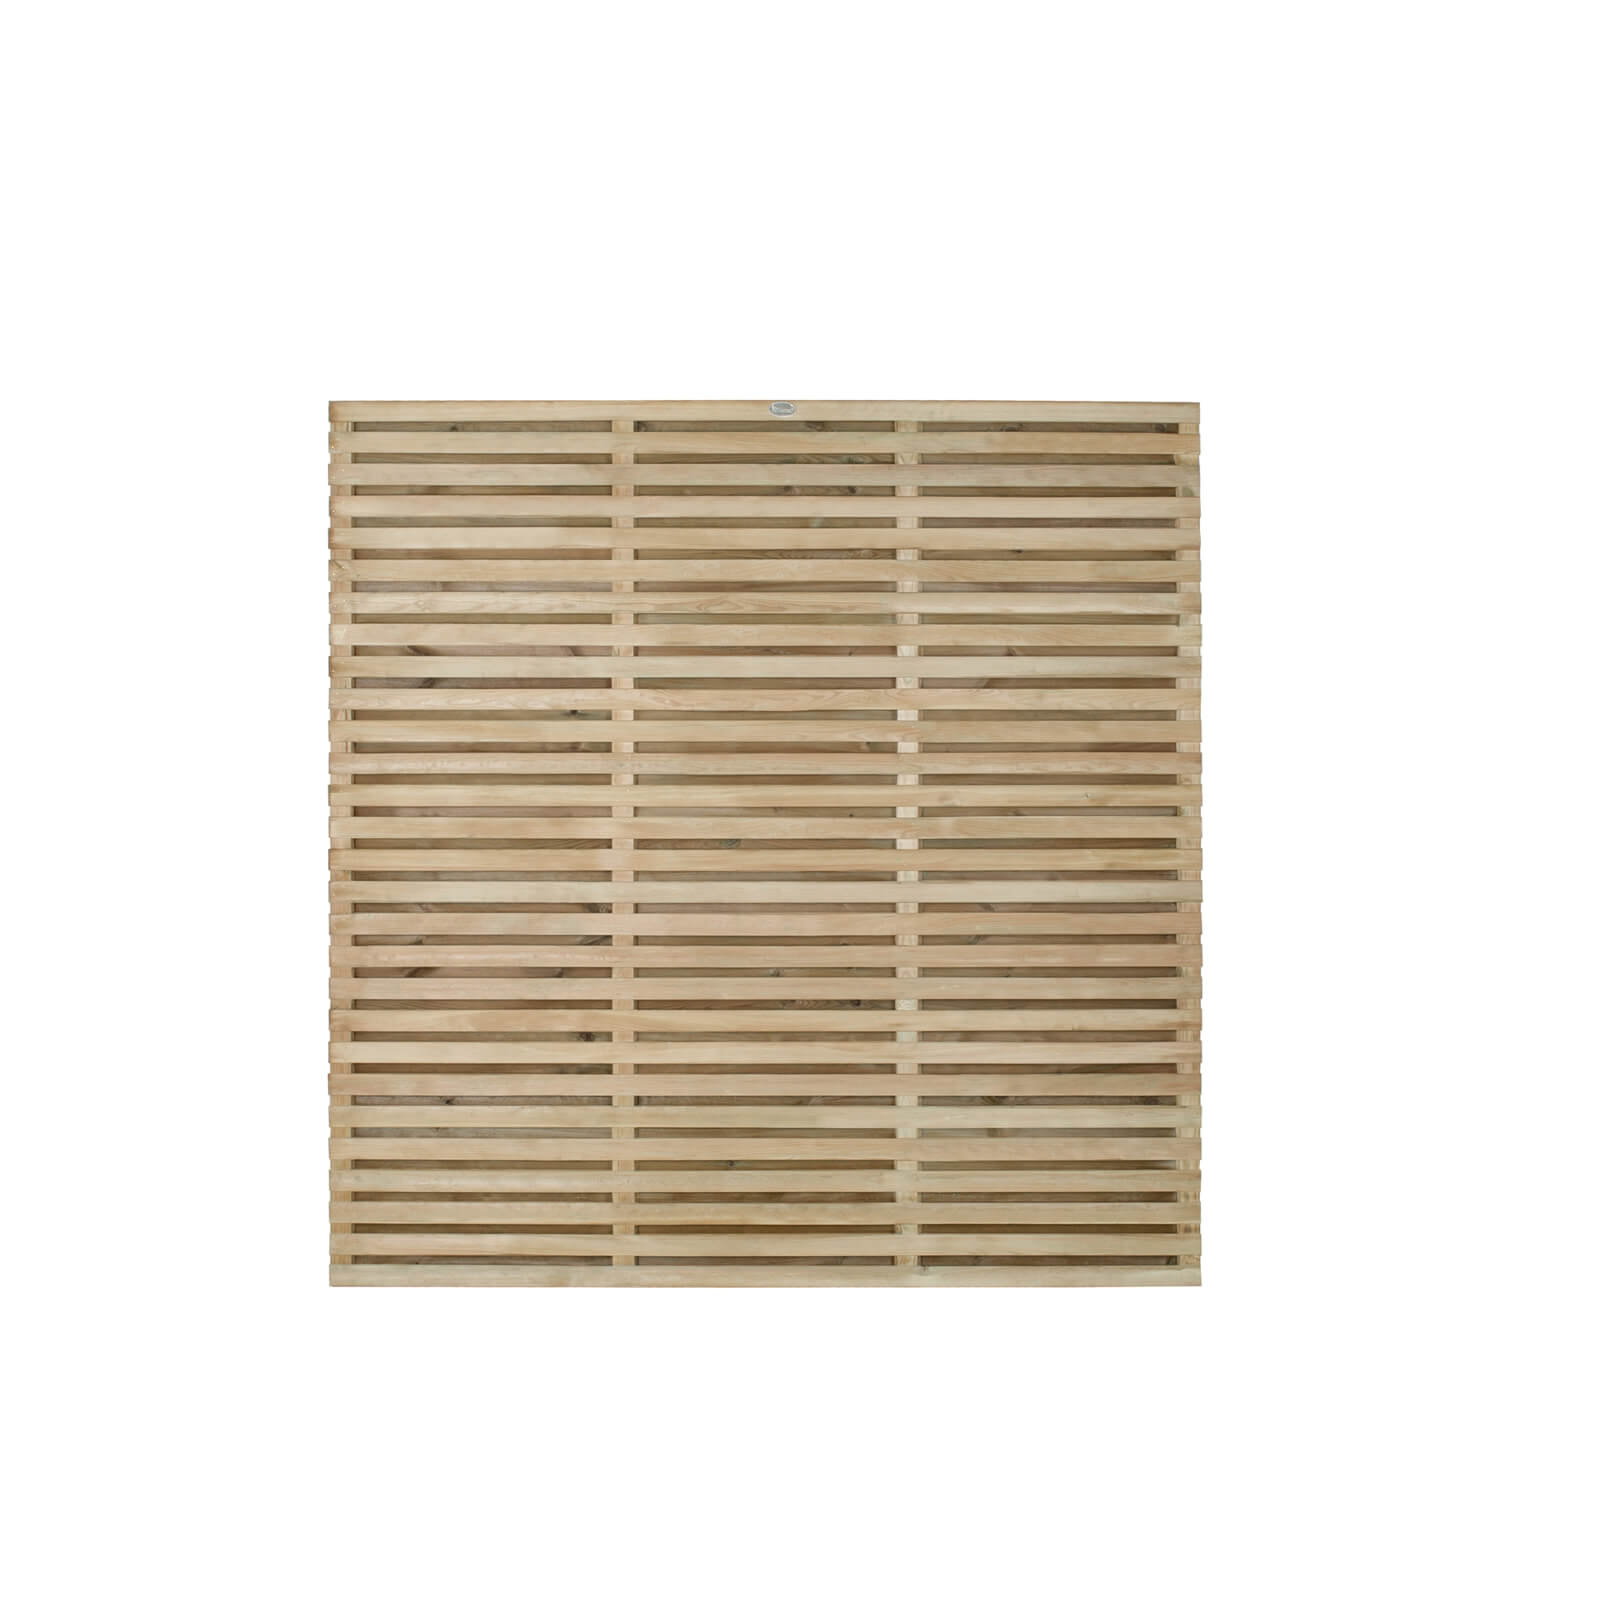 Forest Double Forest Slatted Fence Panel - 6ft - Pack of 4